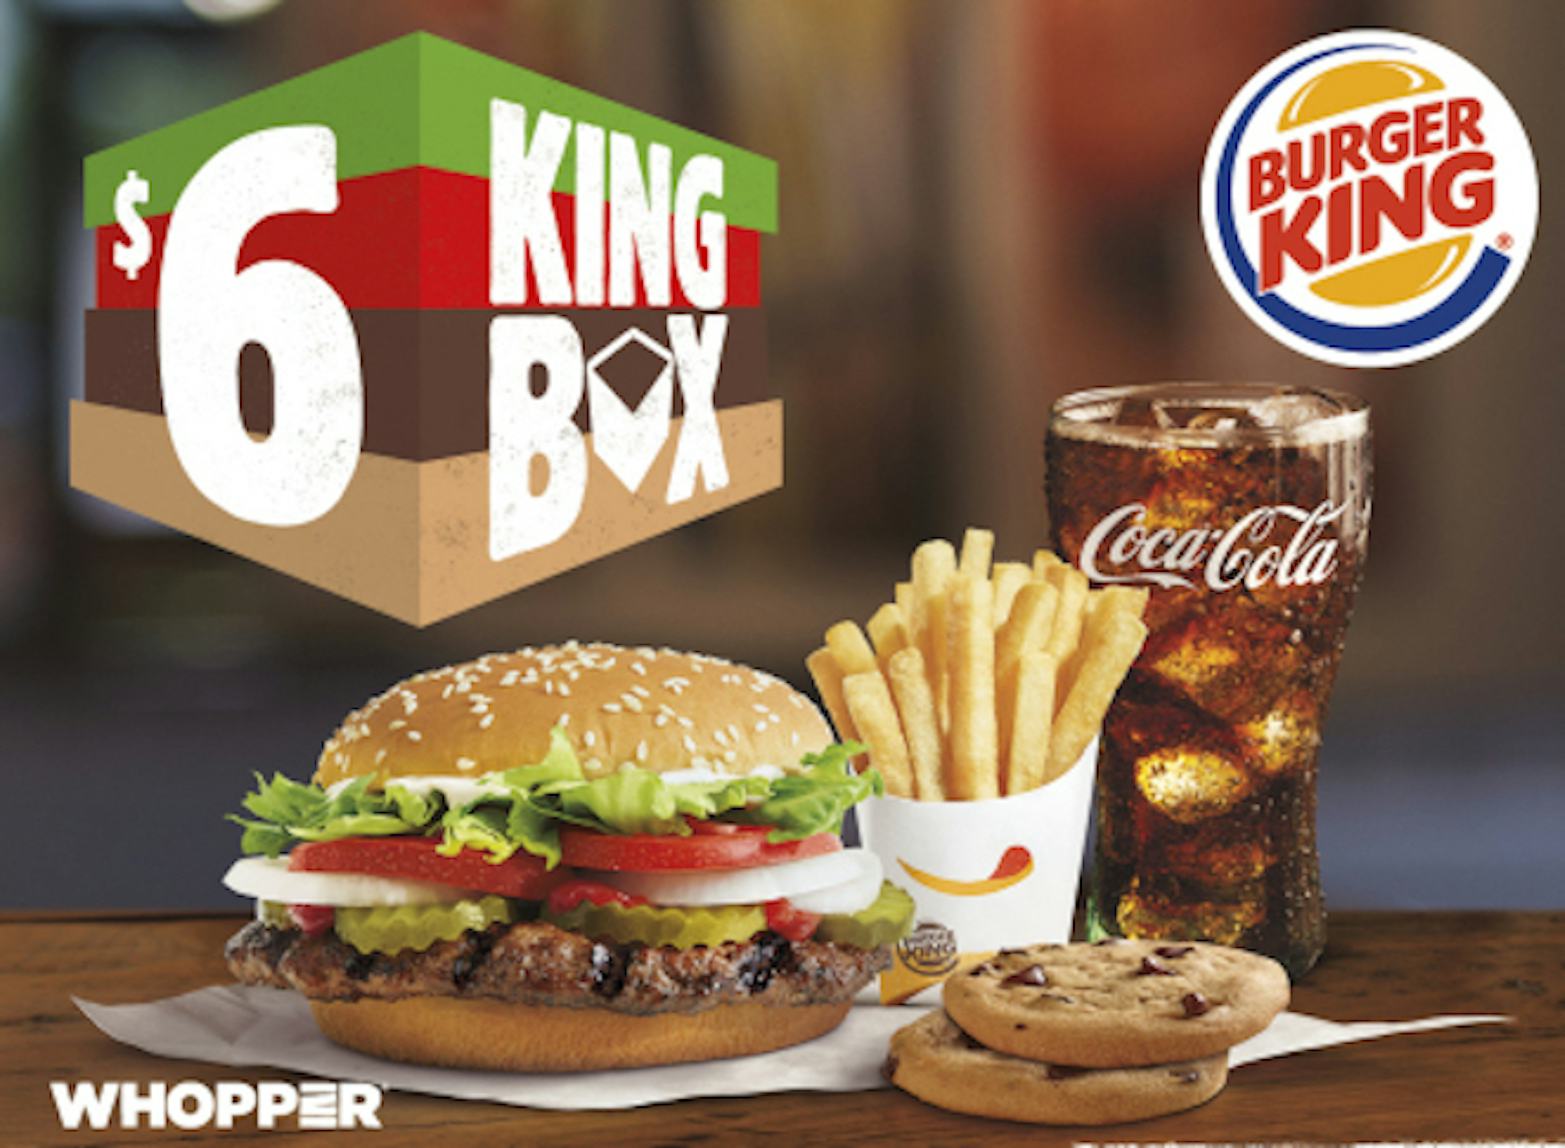 Burger King’s 6 King Box Is A Meal Deal To Treat Yourself On A Budget